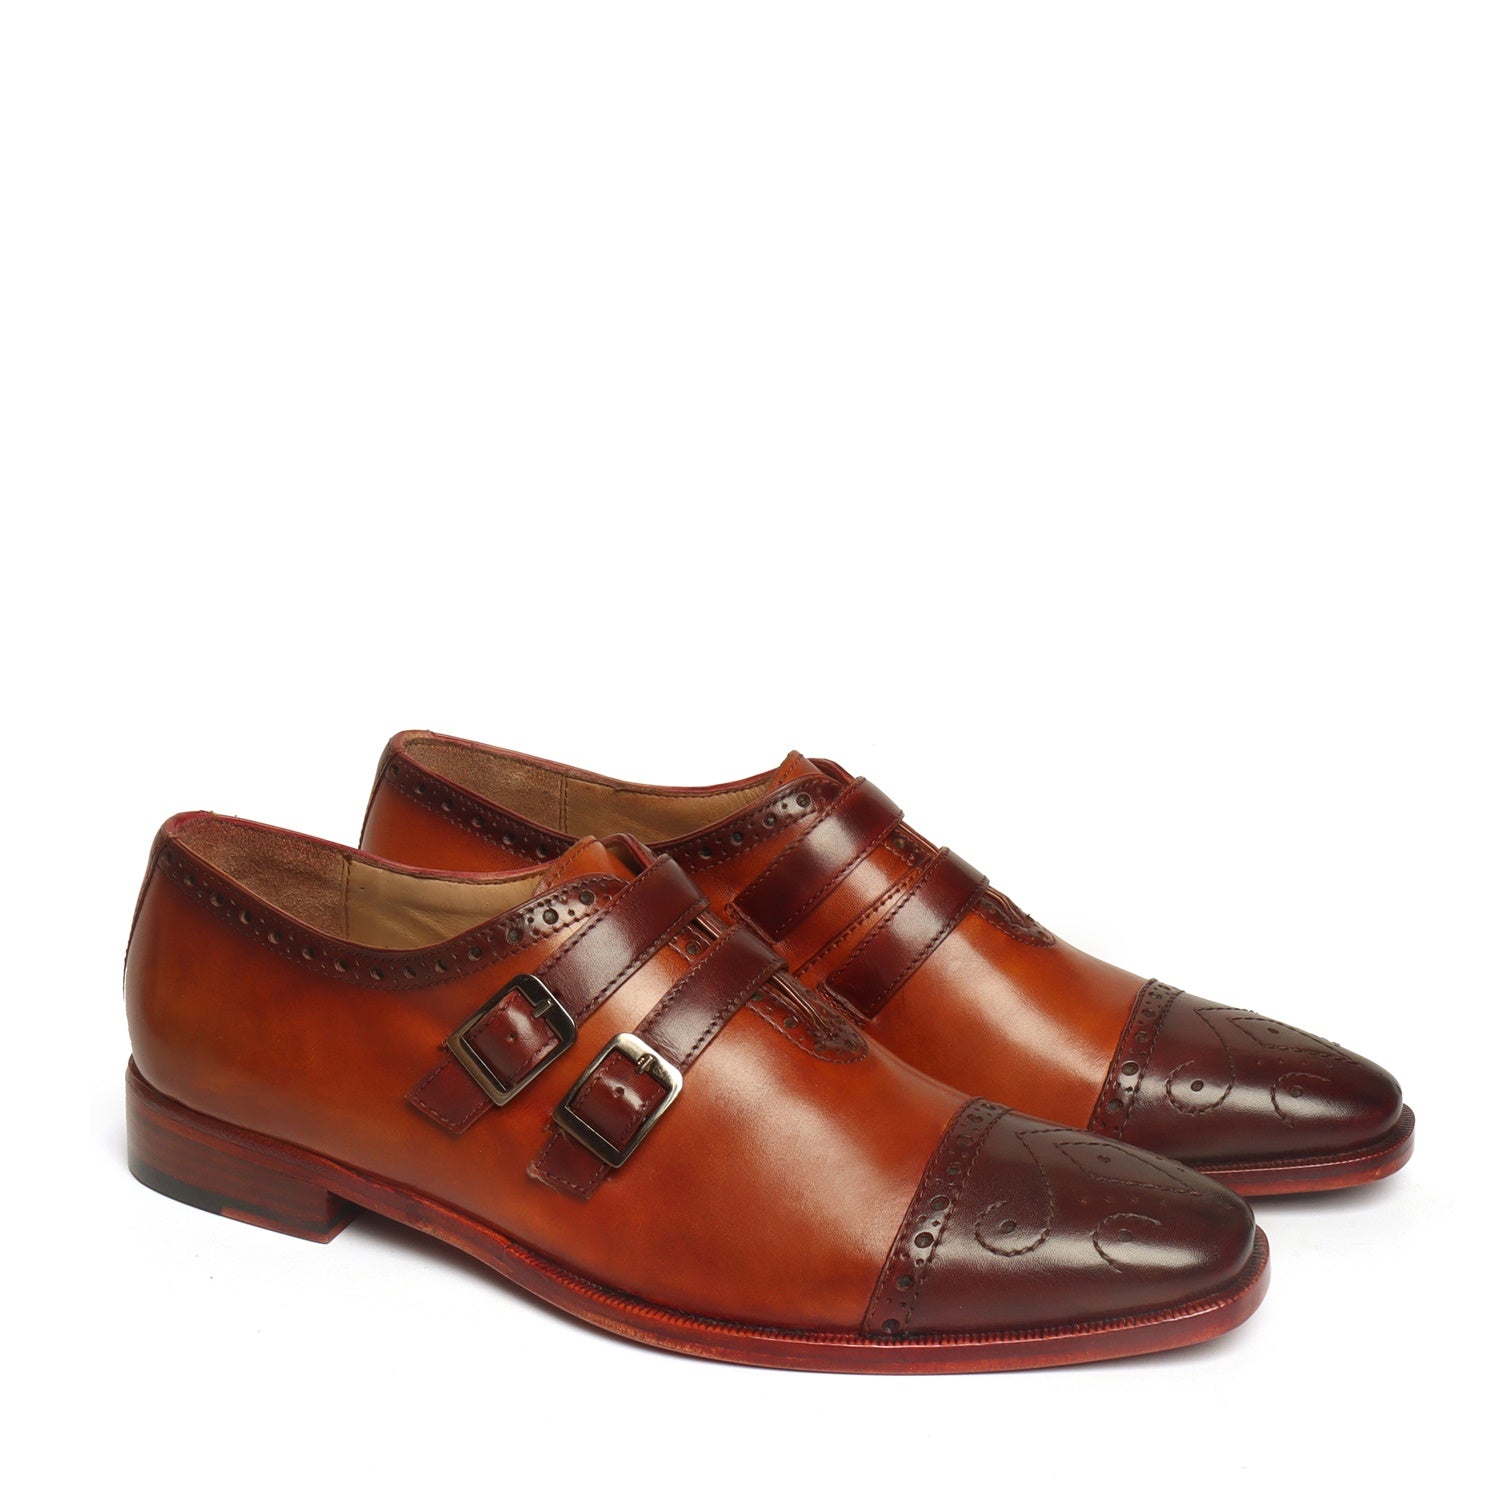 Tan-Brown Contrasting Cap Toe Leather Parallel Double Monk Straps Shoes by BRUNE & BARESKIN